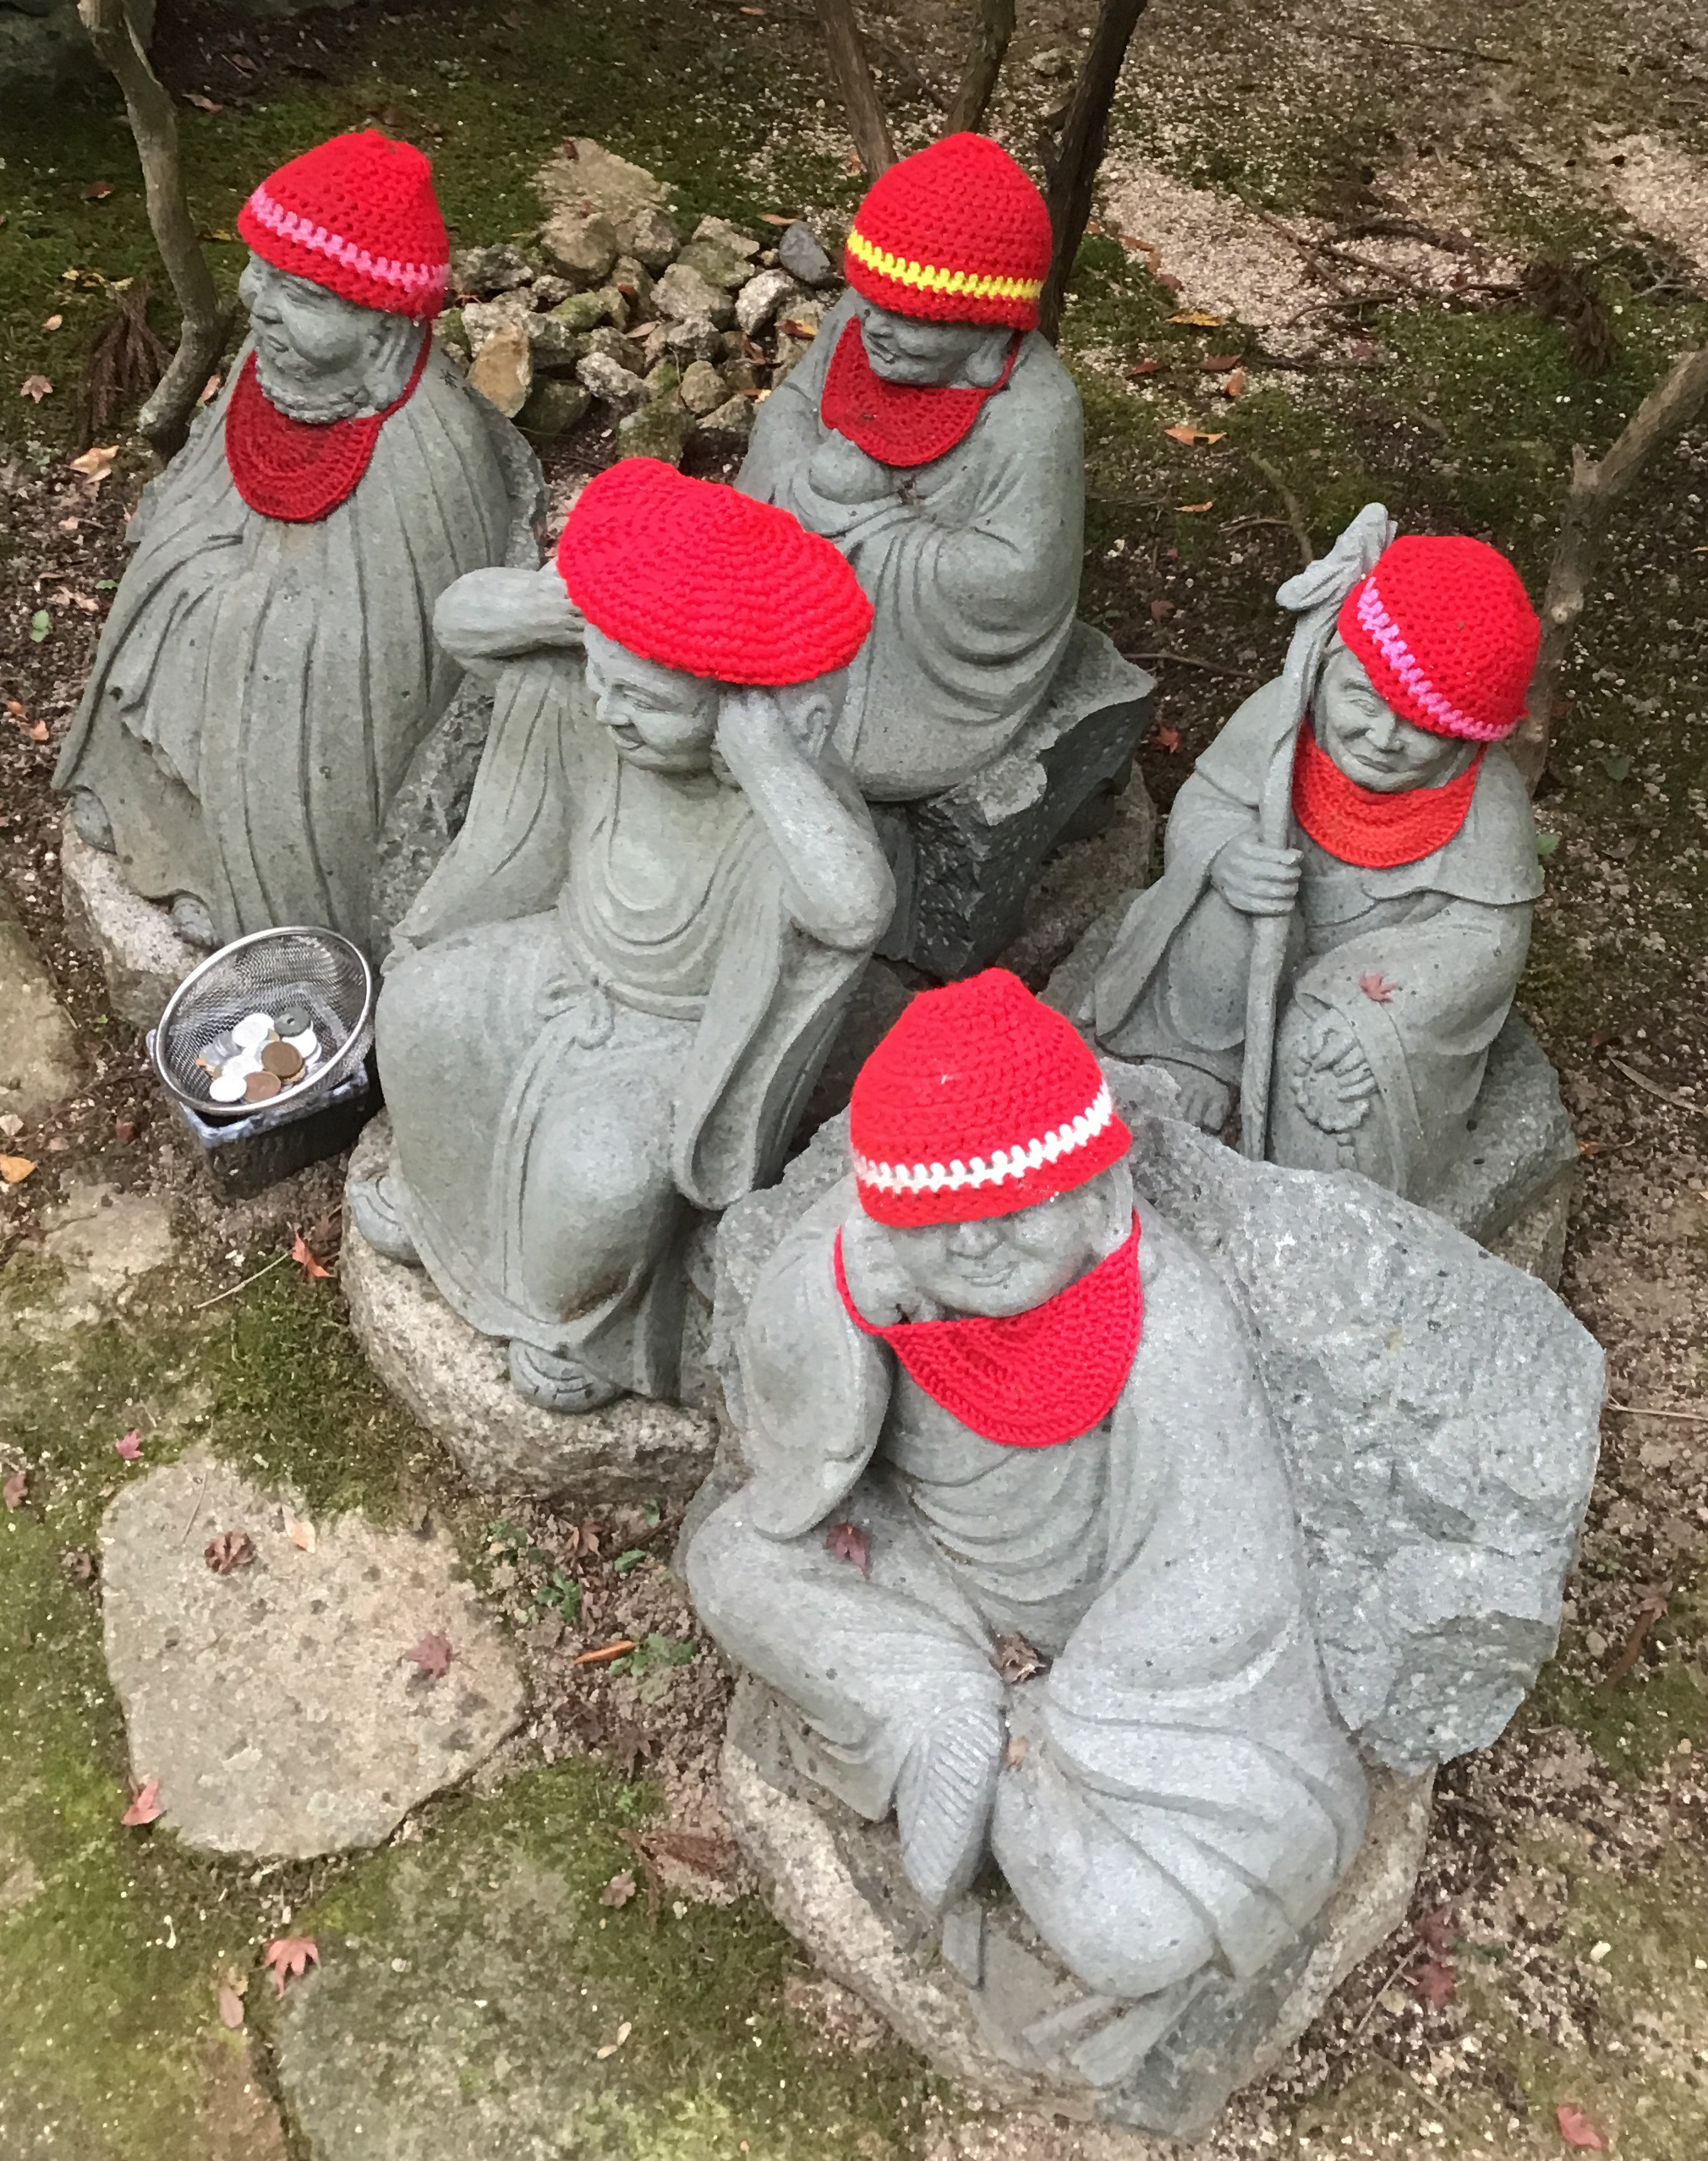 Statues of monks wearing red hats